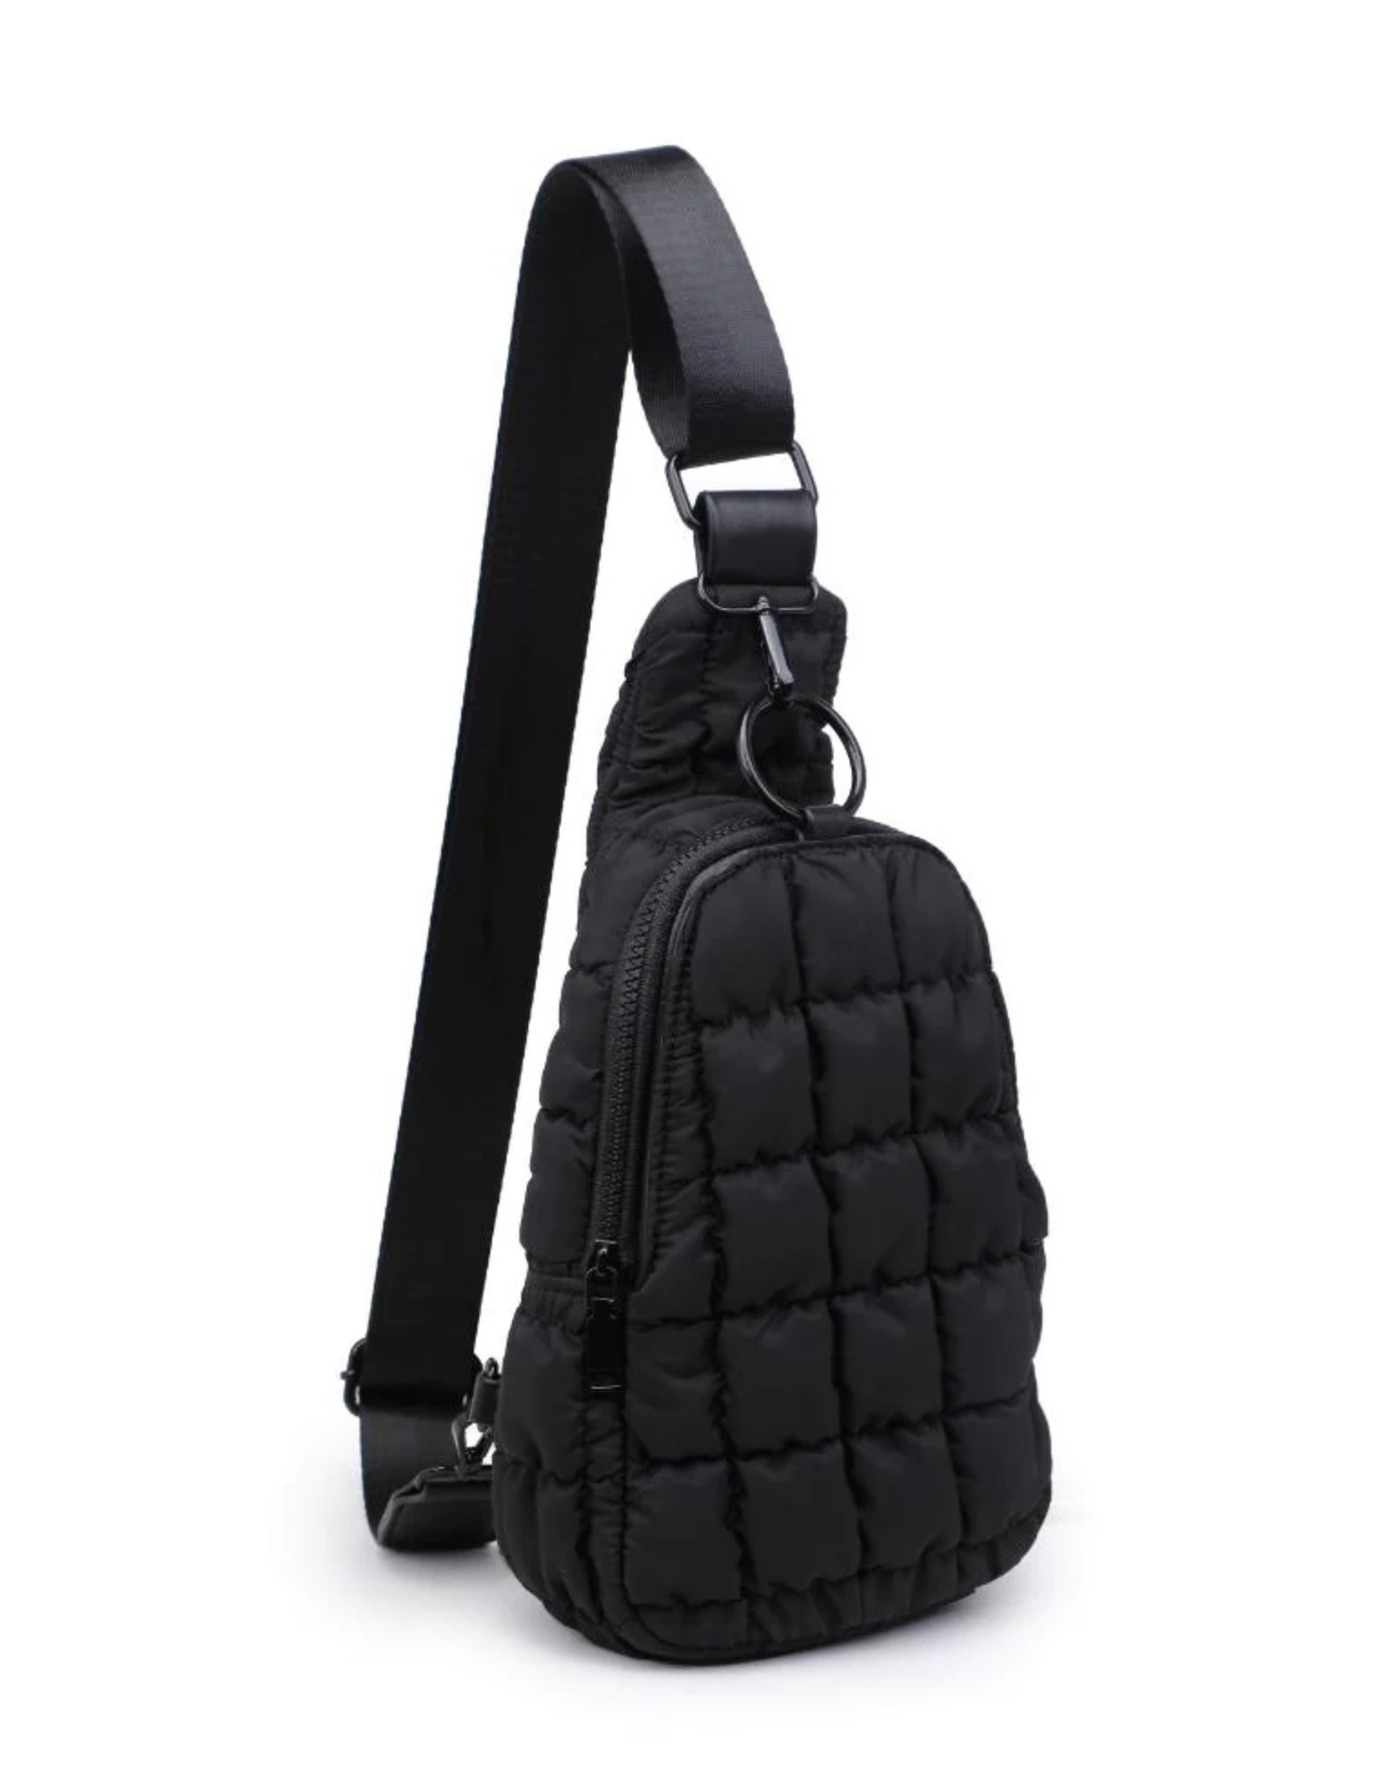 Puffy Perfection Sling Bag, Black